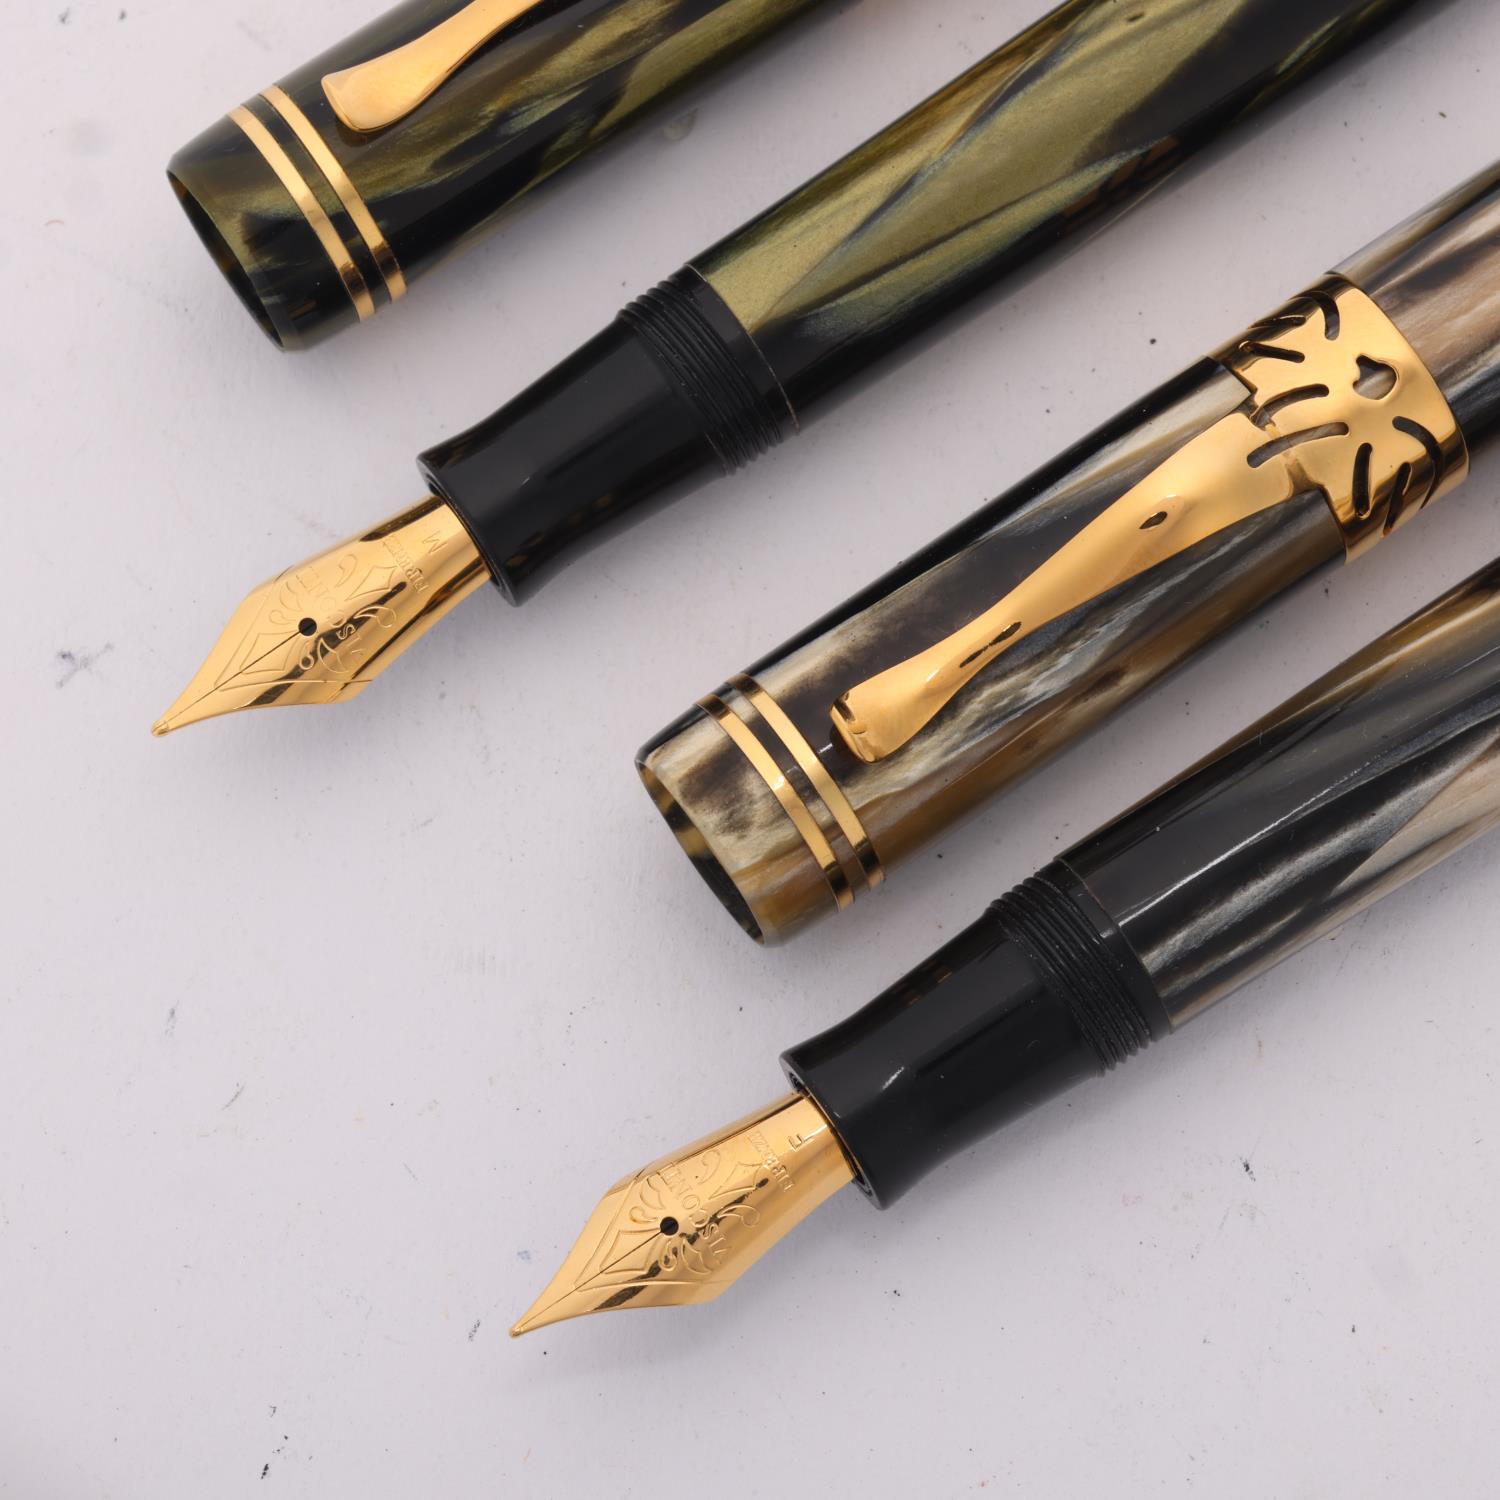 2 Visconti "Frederico II" fountain pens, piston fill with marbled body, limited edition of 800, both - Image 2 of 4